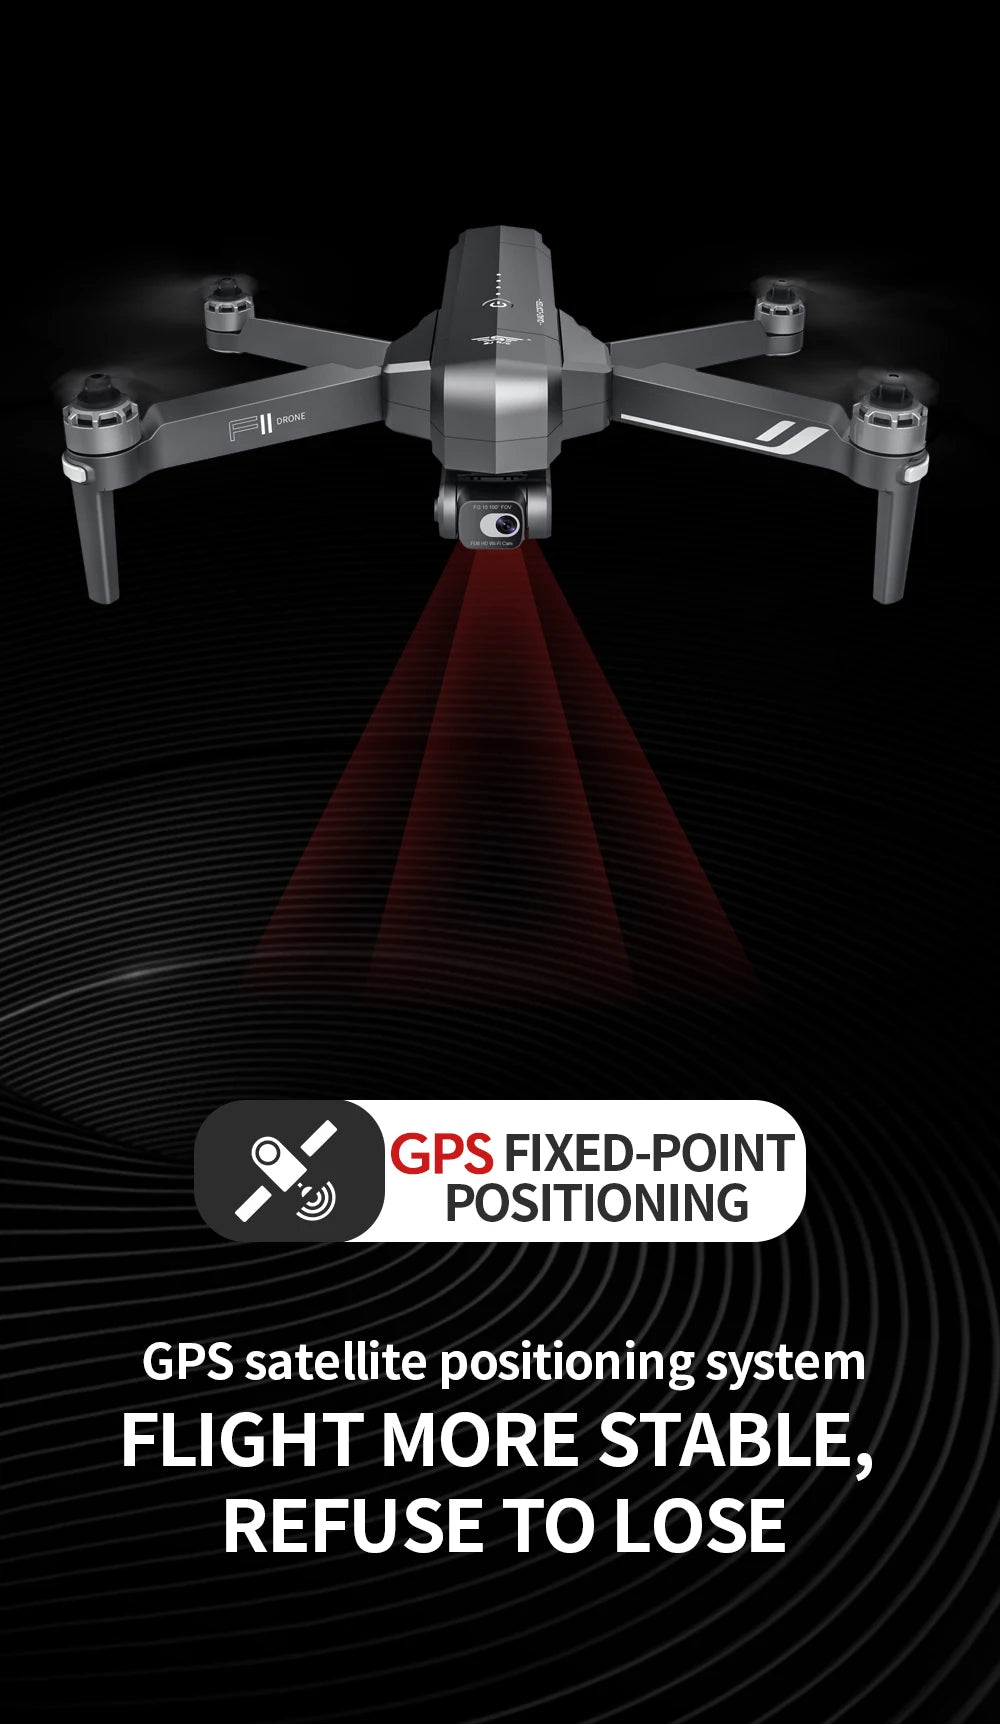 SJRC F11 / F11S  Pro Drone, GPS FIXED-POINT POSITIONING GPS satellite positioning system FLIGHT